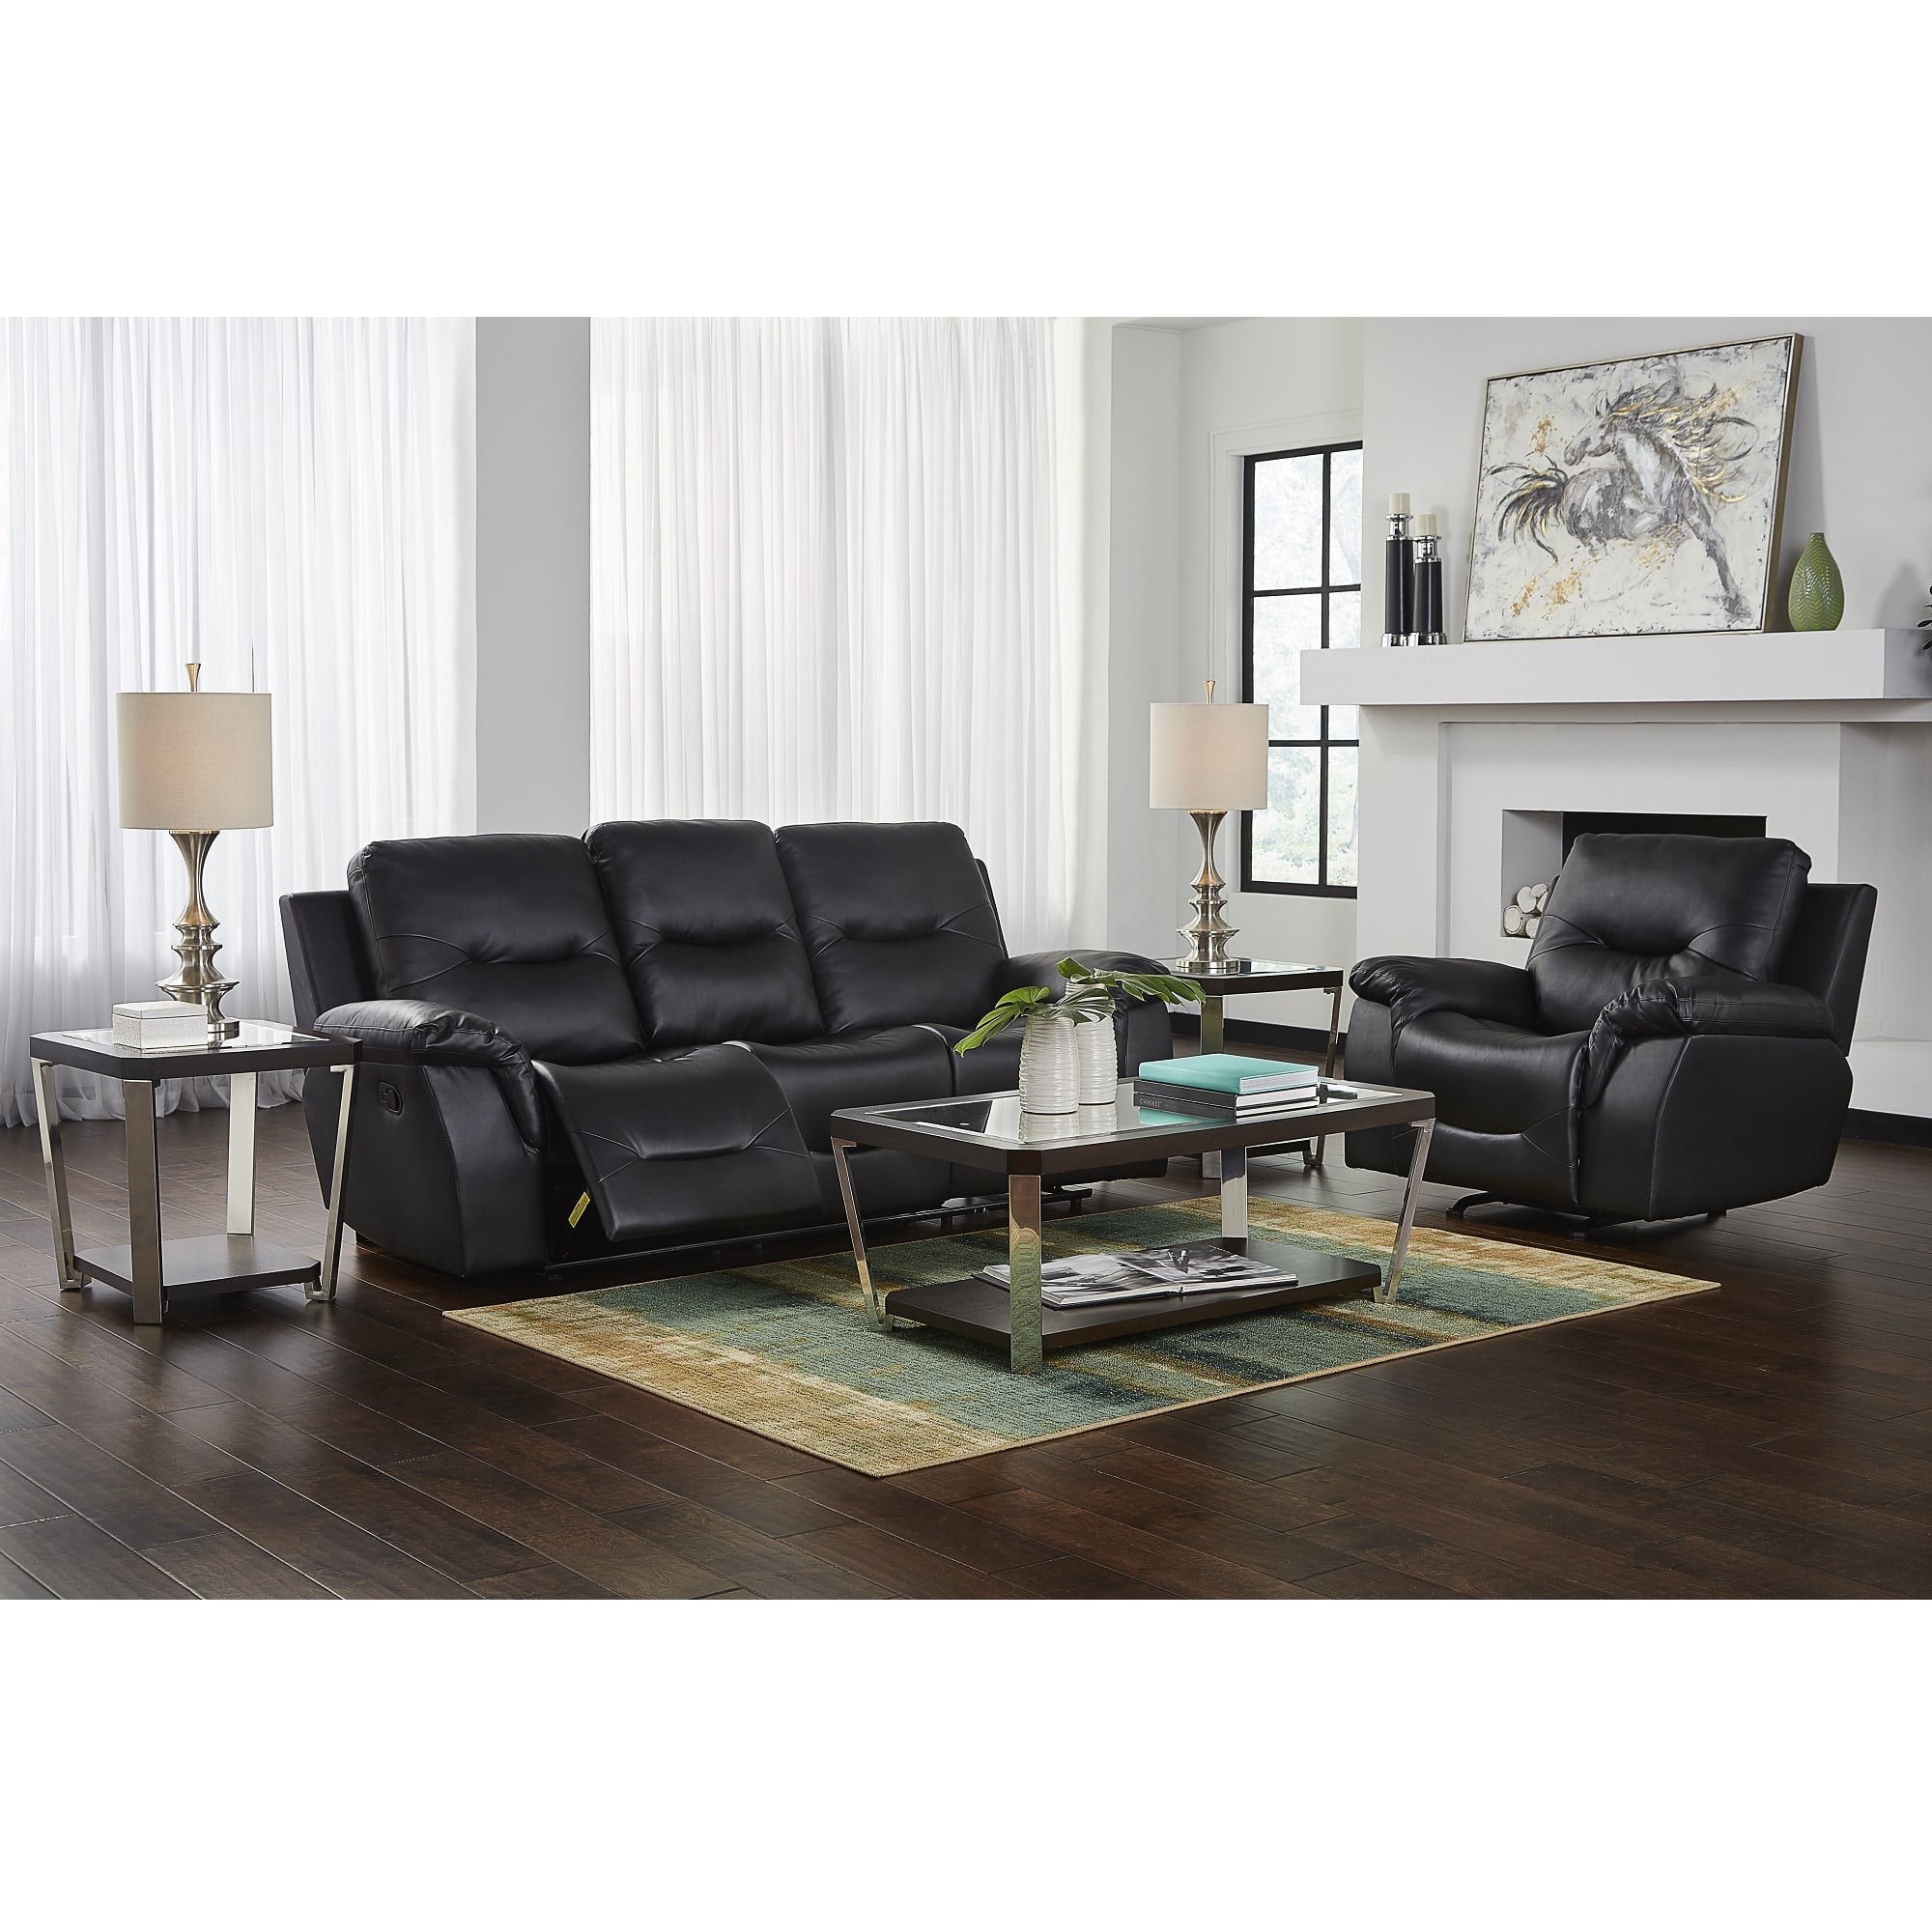 Rent To Own Amalfi 8 Piece Callen Reclining Living Room Collection At Aarons Today